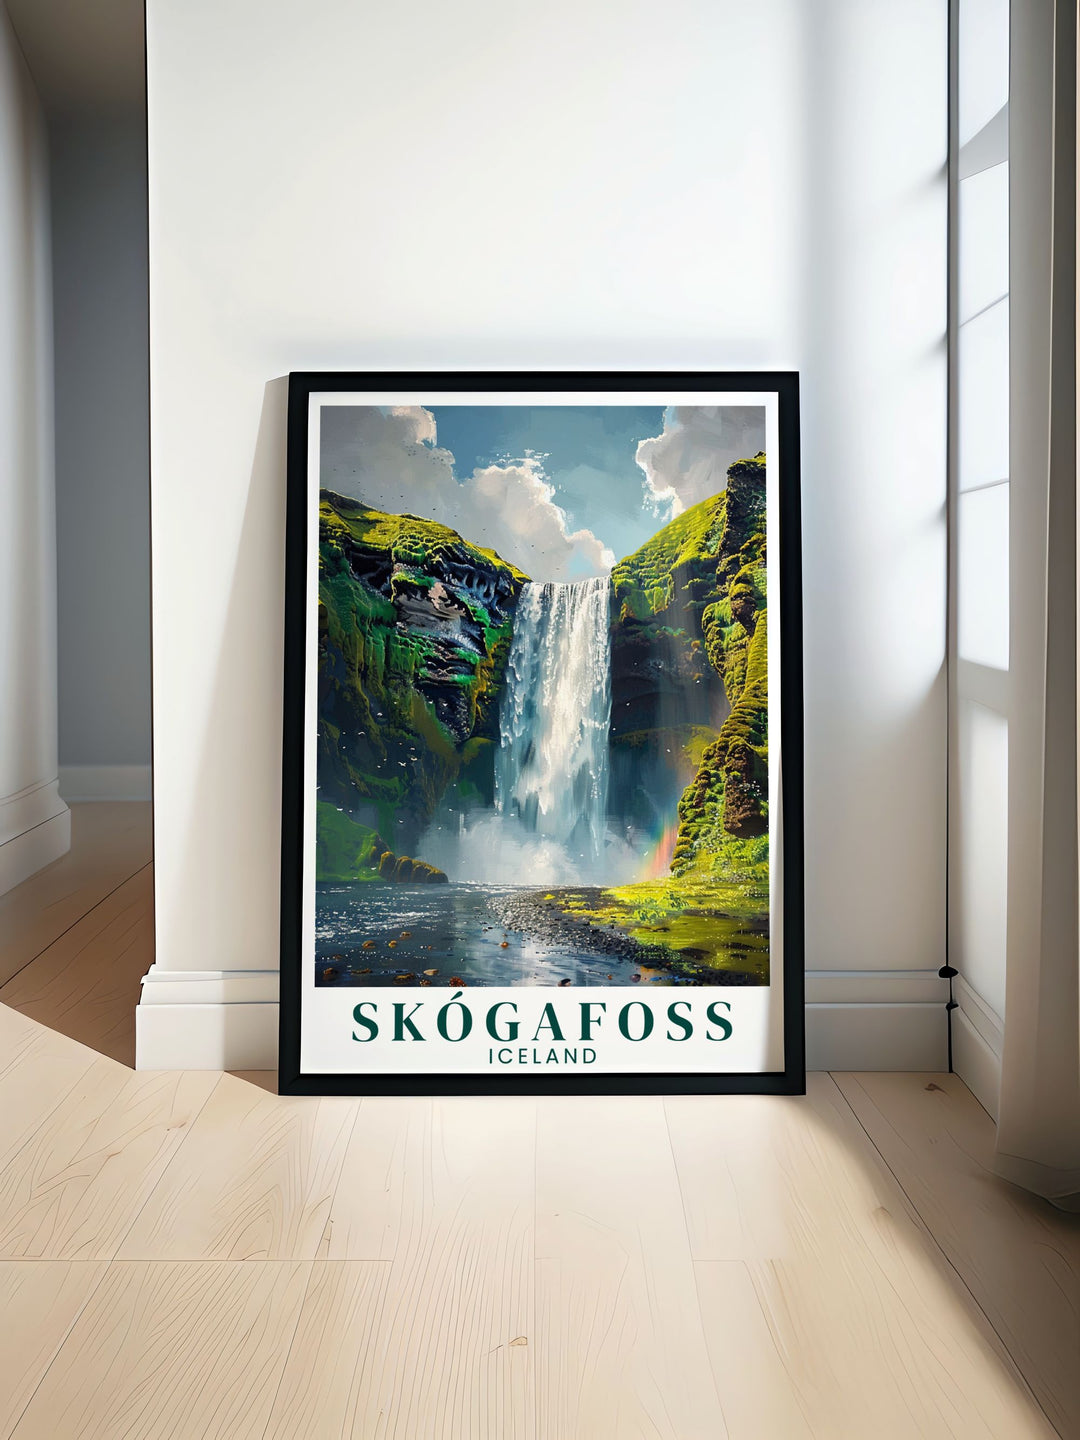 Stunning Skogafoss waterfall travel poster showcasing the majestic beauty of one of Icelands most iconic landmarks perfect for adding a touch of natural wonder to your home decor and inspiring your next adventure.